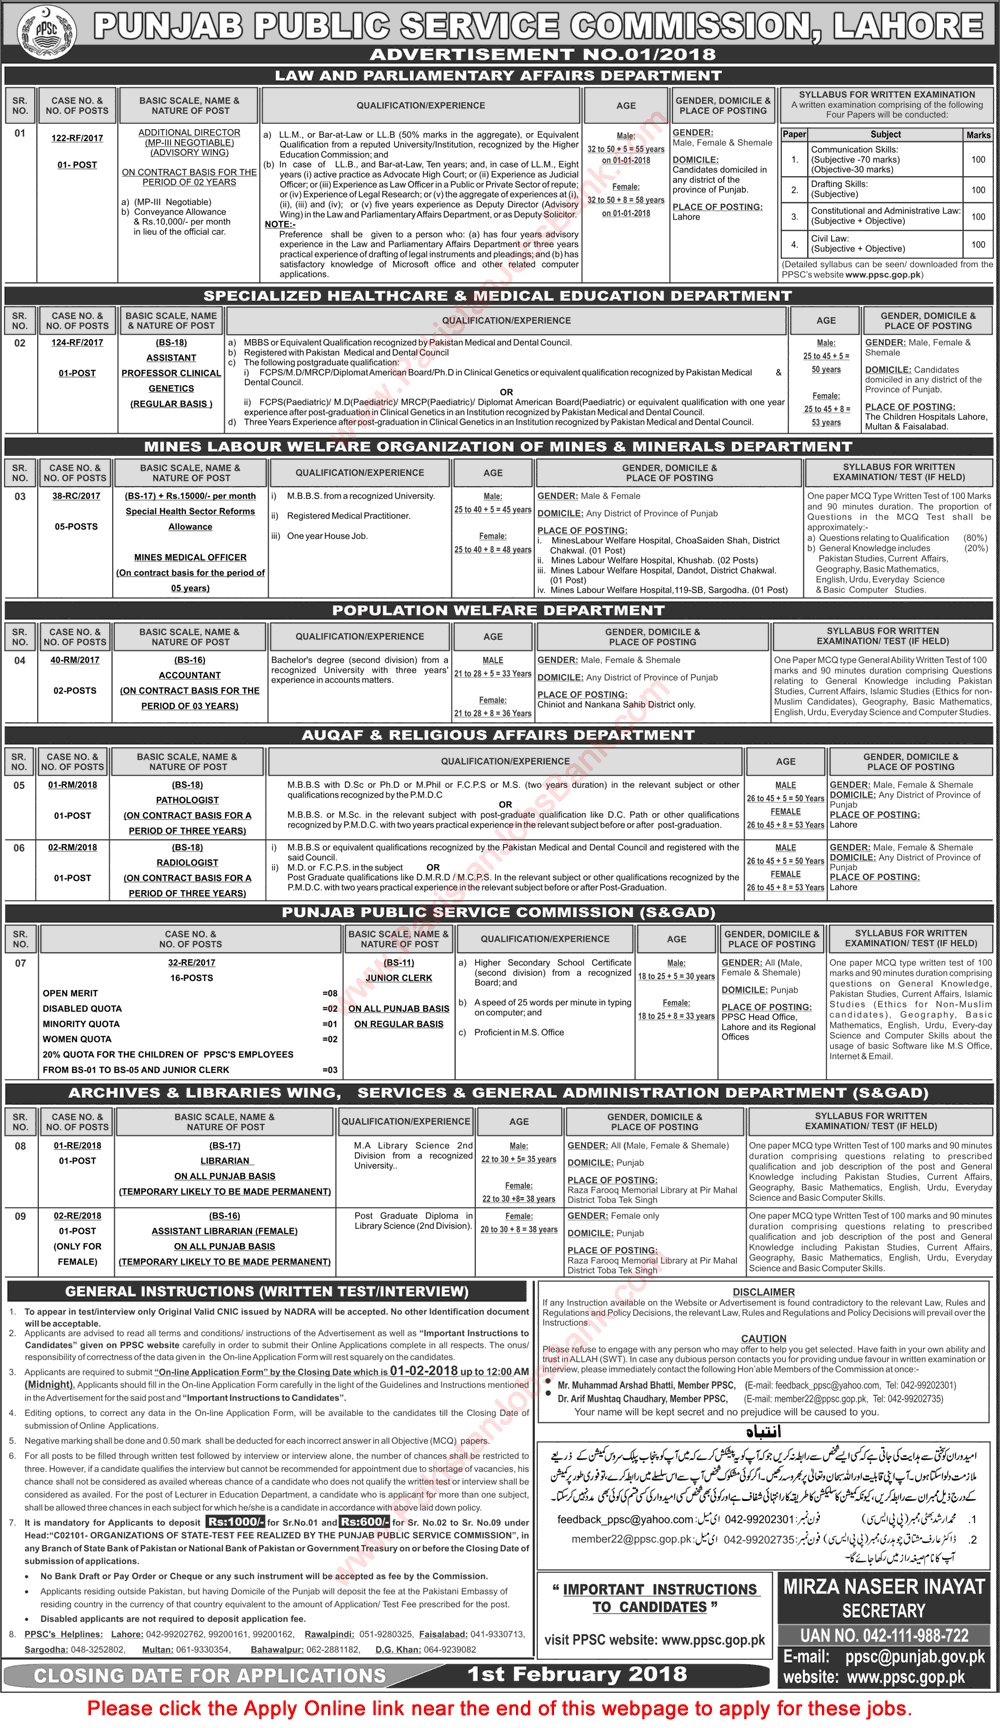 PPSC Jobs 2018 Apply Online Consolidated Advertisement No 01/2018 1/2018 Latest